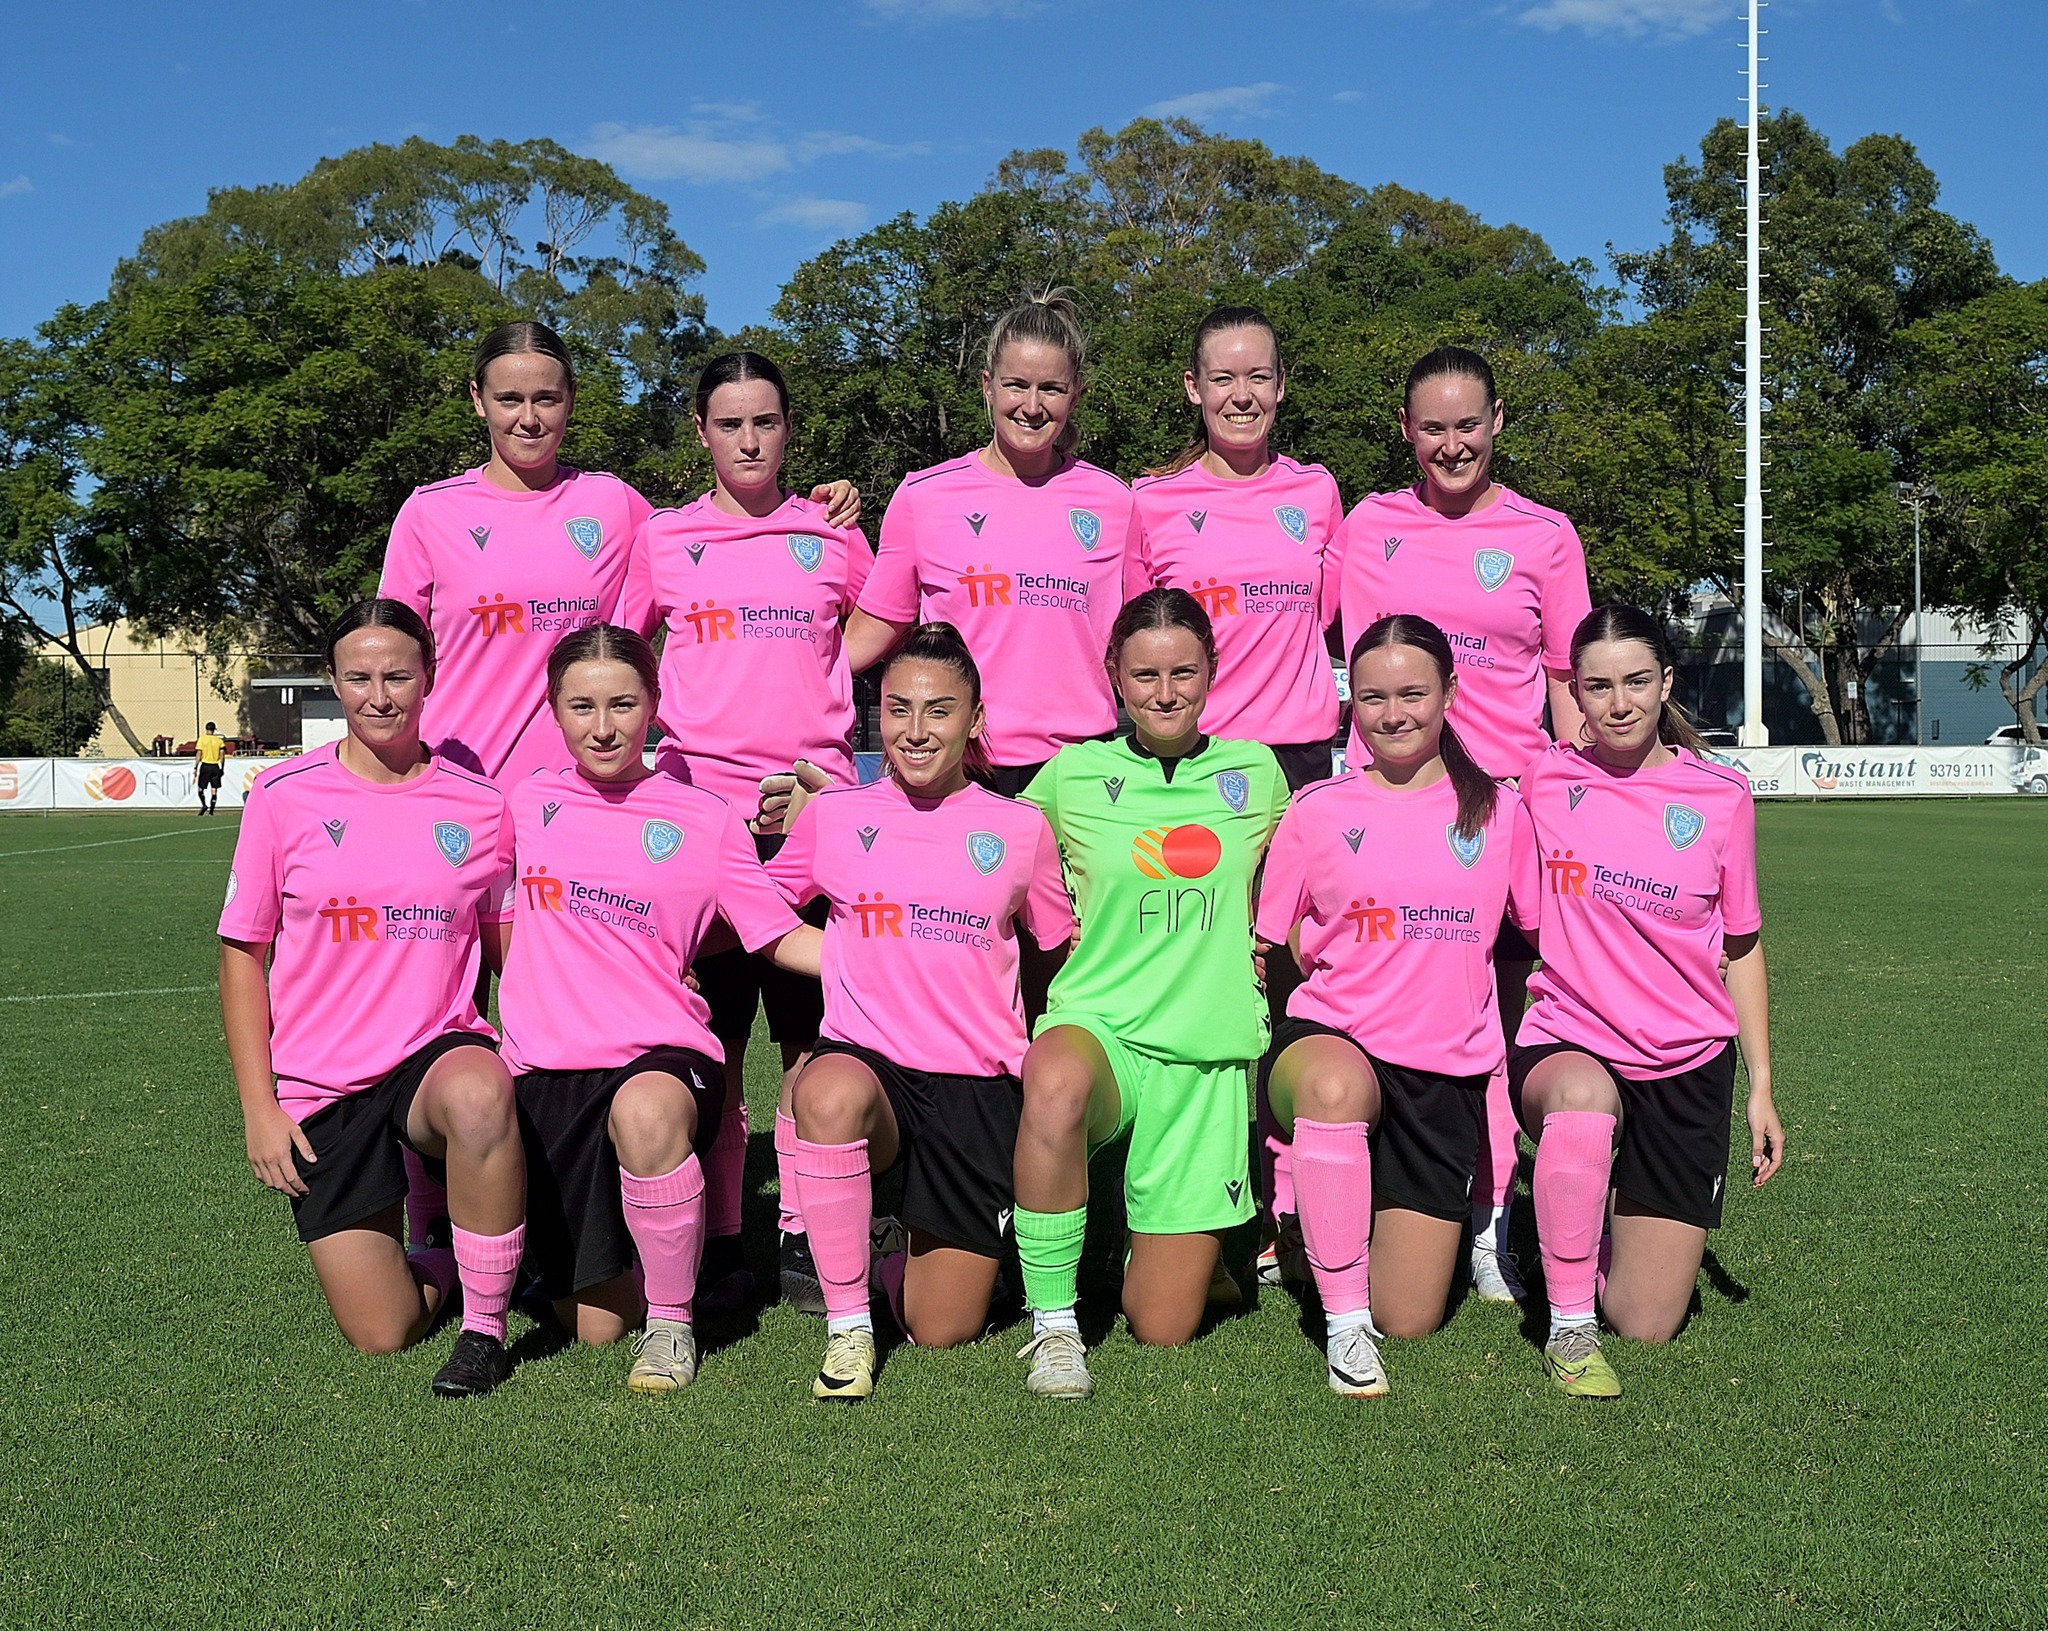 Perth SC with a special pink kit for their annual fundraiser for Breast Cancer awareness and research. Image Credit Rob Lizzi